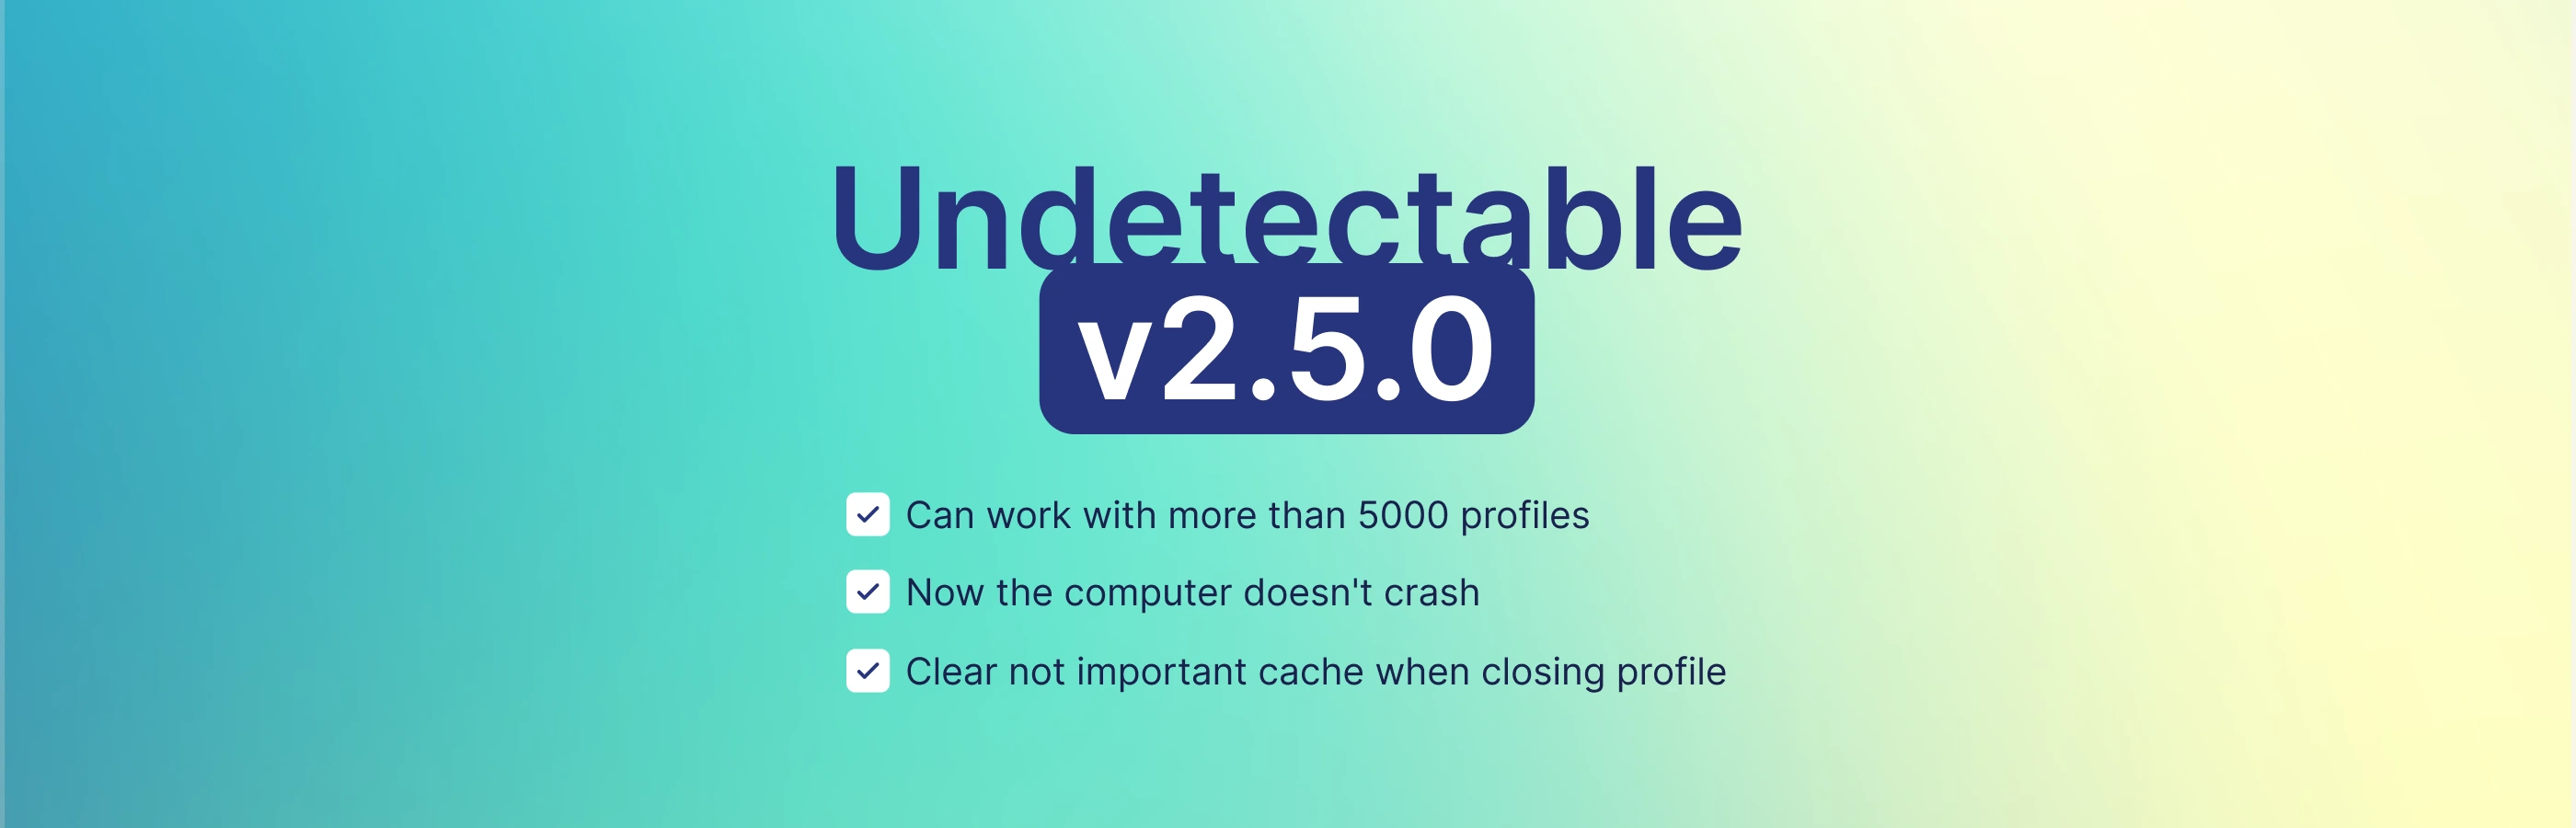 Undetectable 2.5.0: browser optimization for large projects